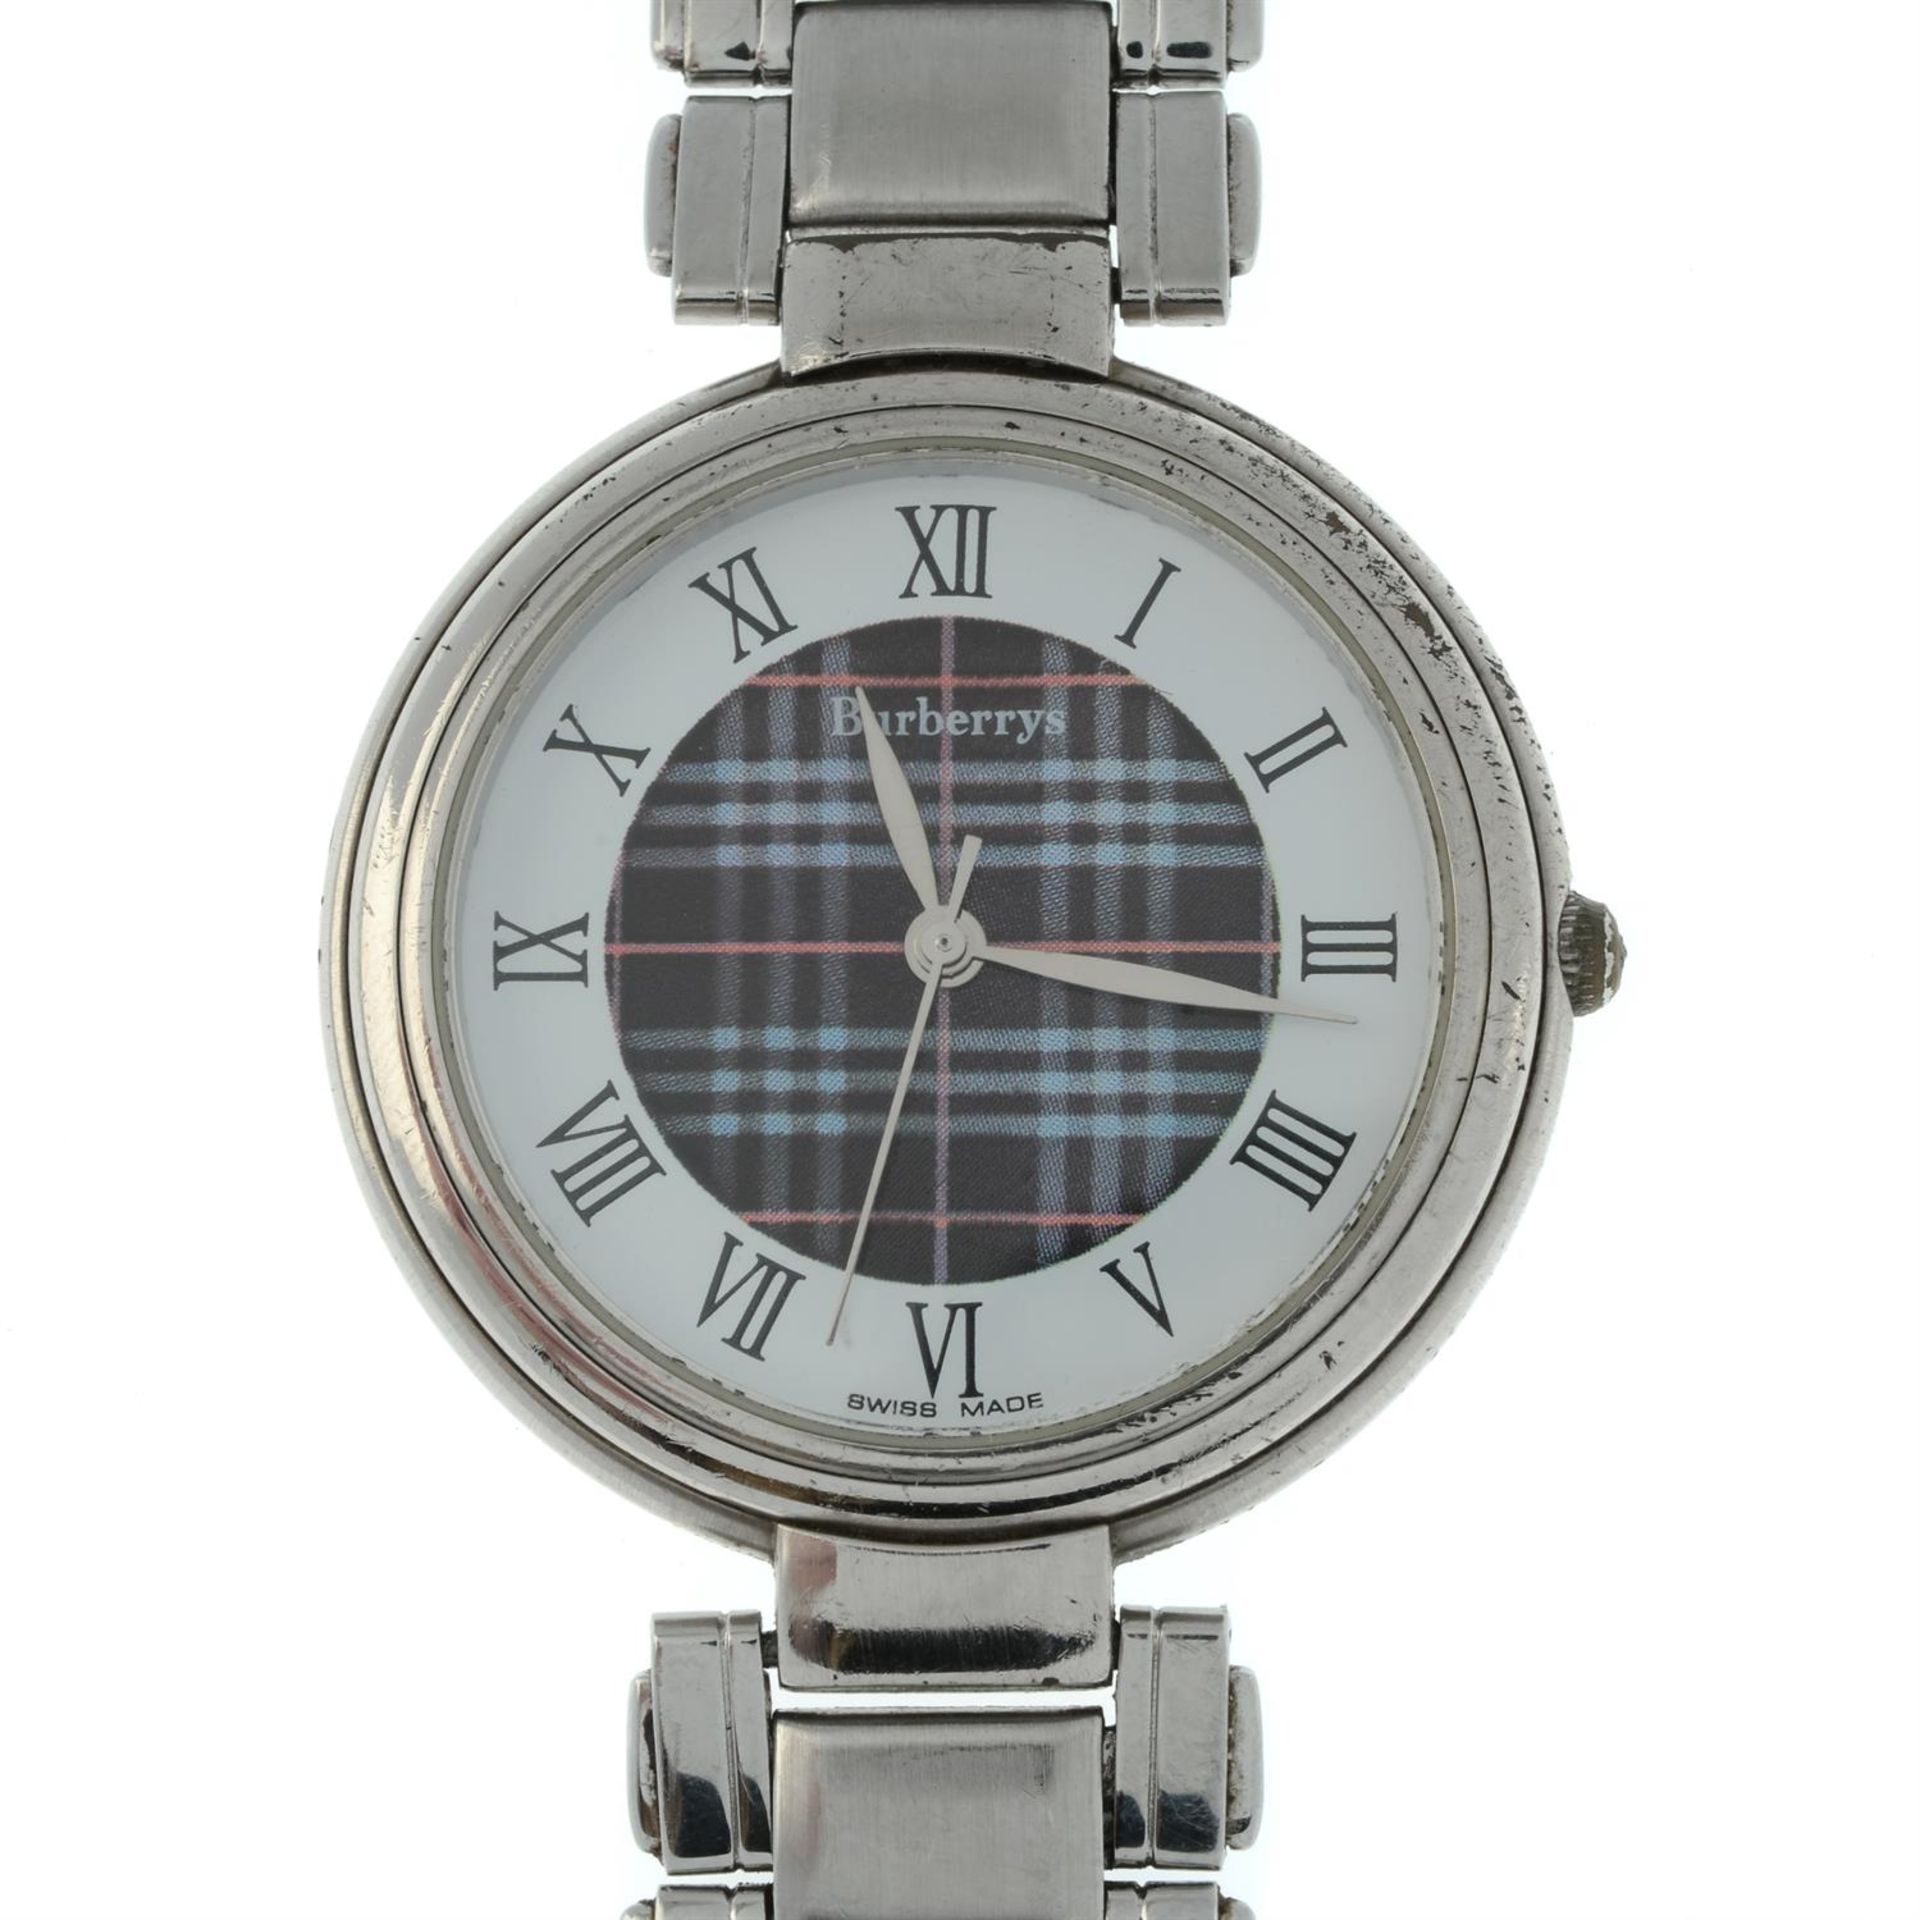 BURBERRY - a stainless steel watch.